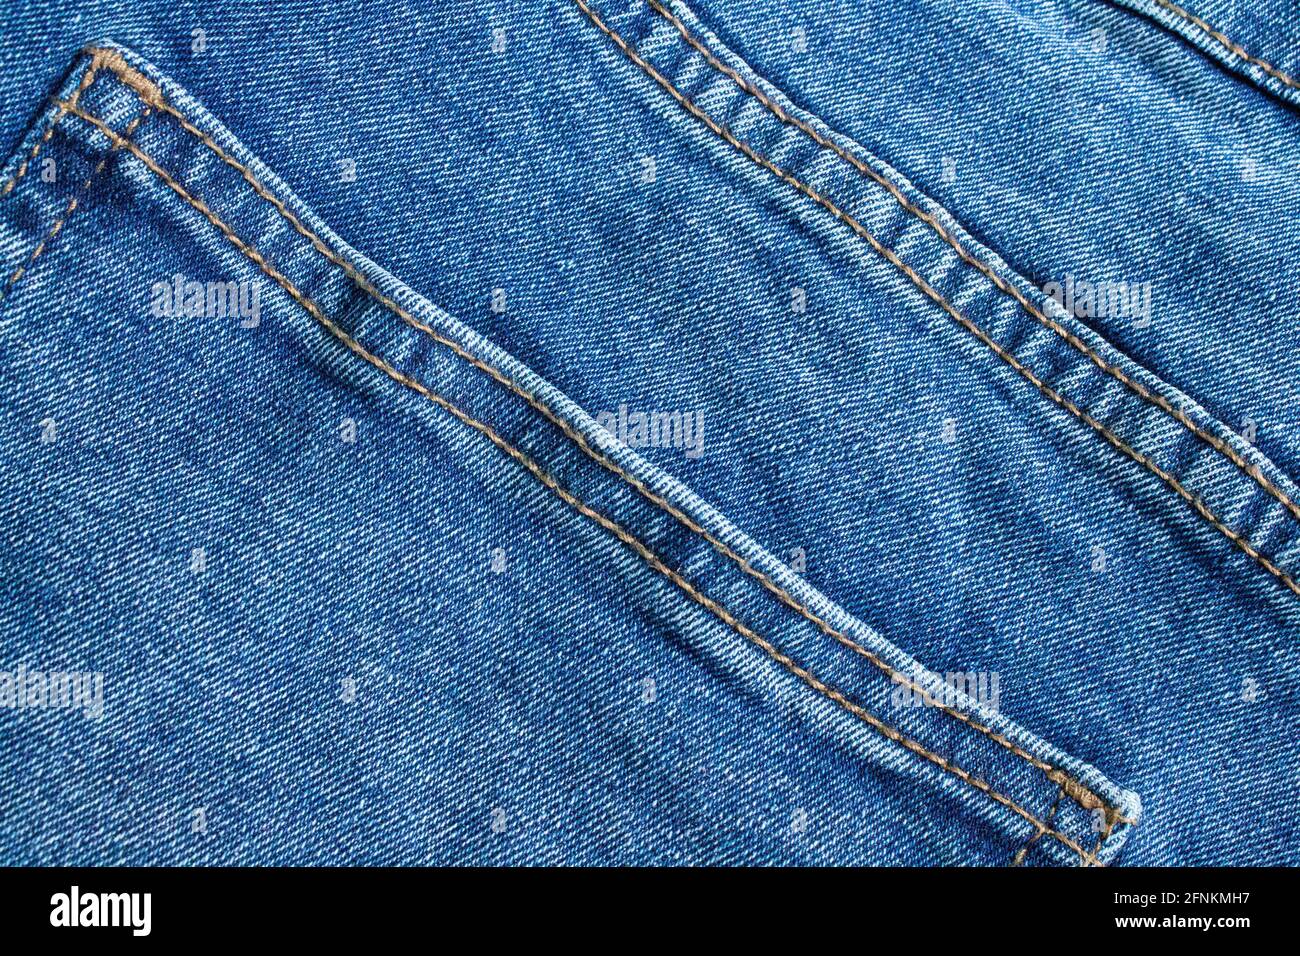 Blue jeans close up. Light blue thick fabric for trousers. Stock Photo